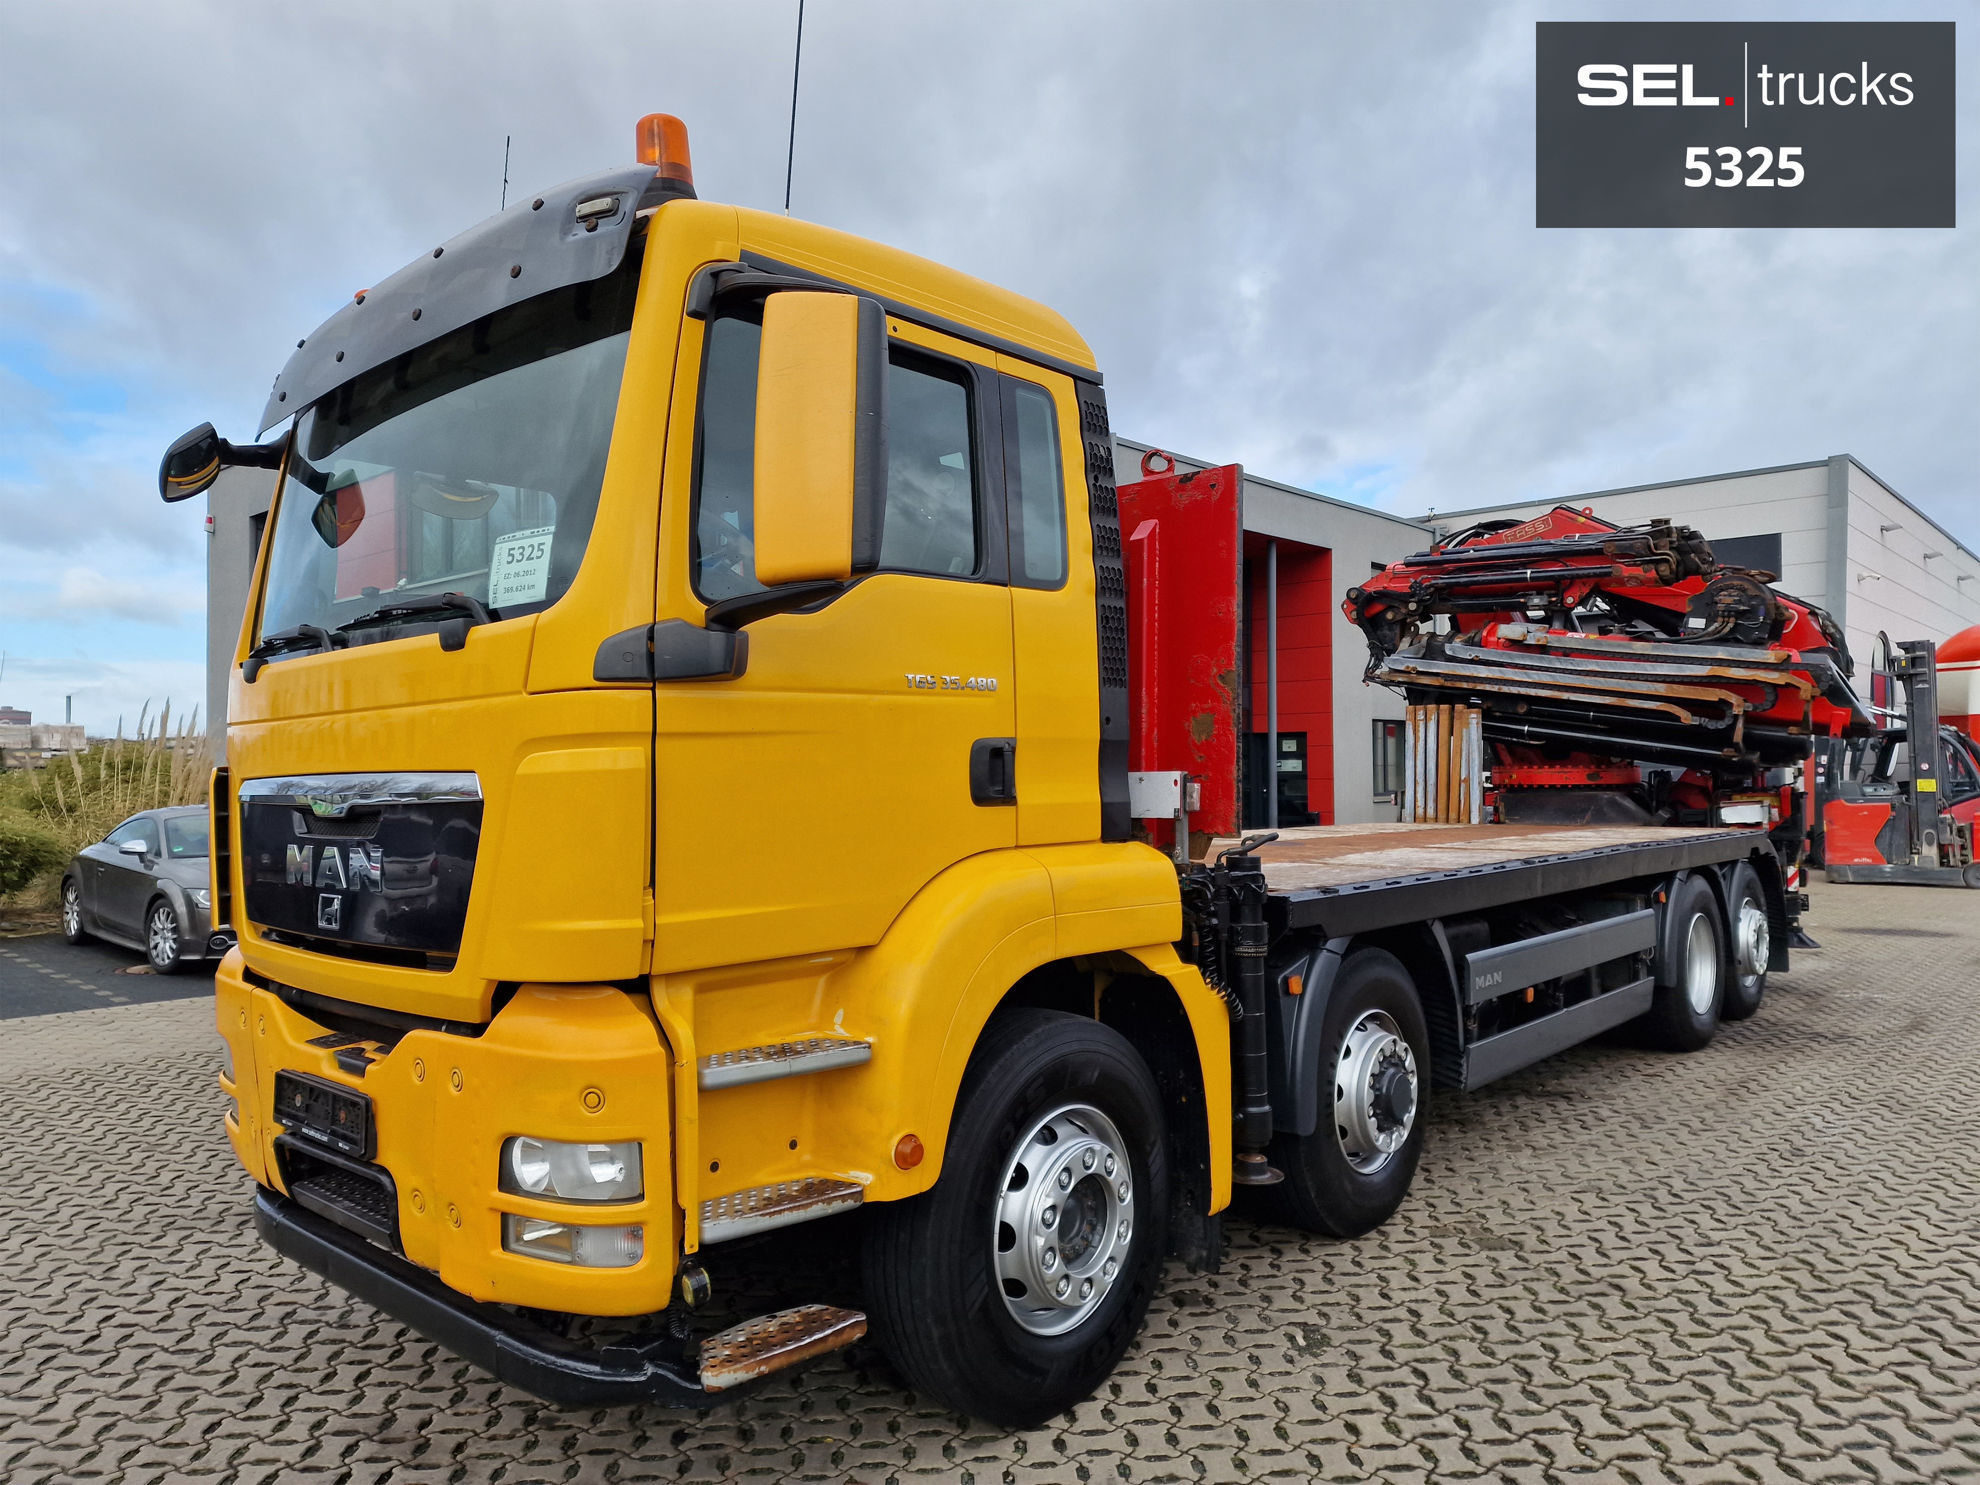 MAN TGS 35.480 8X4H-6 BL Truck. SEL Trucks. Used trucks from Germany. Fast  & easy export service!